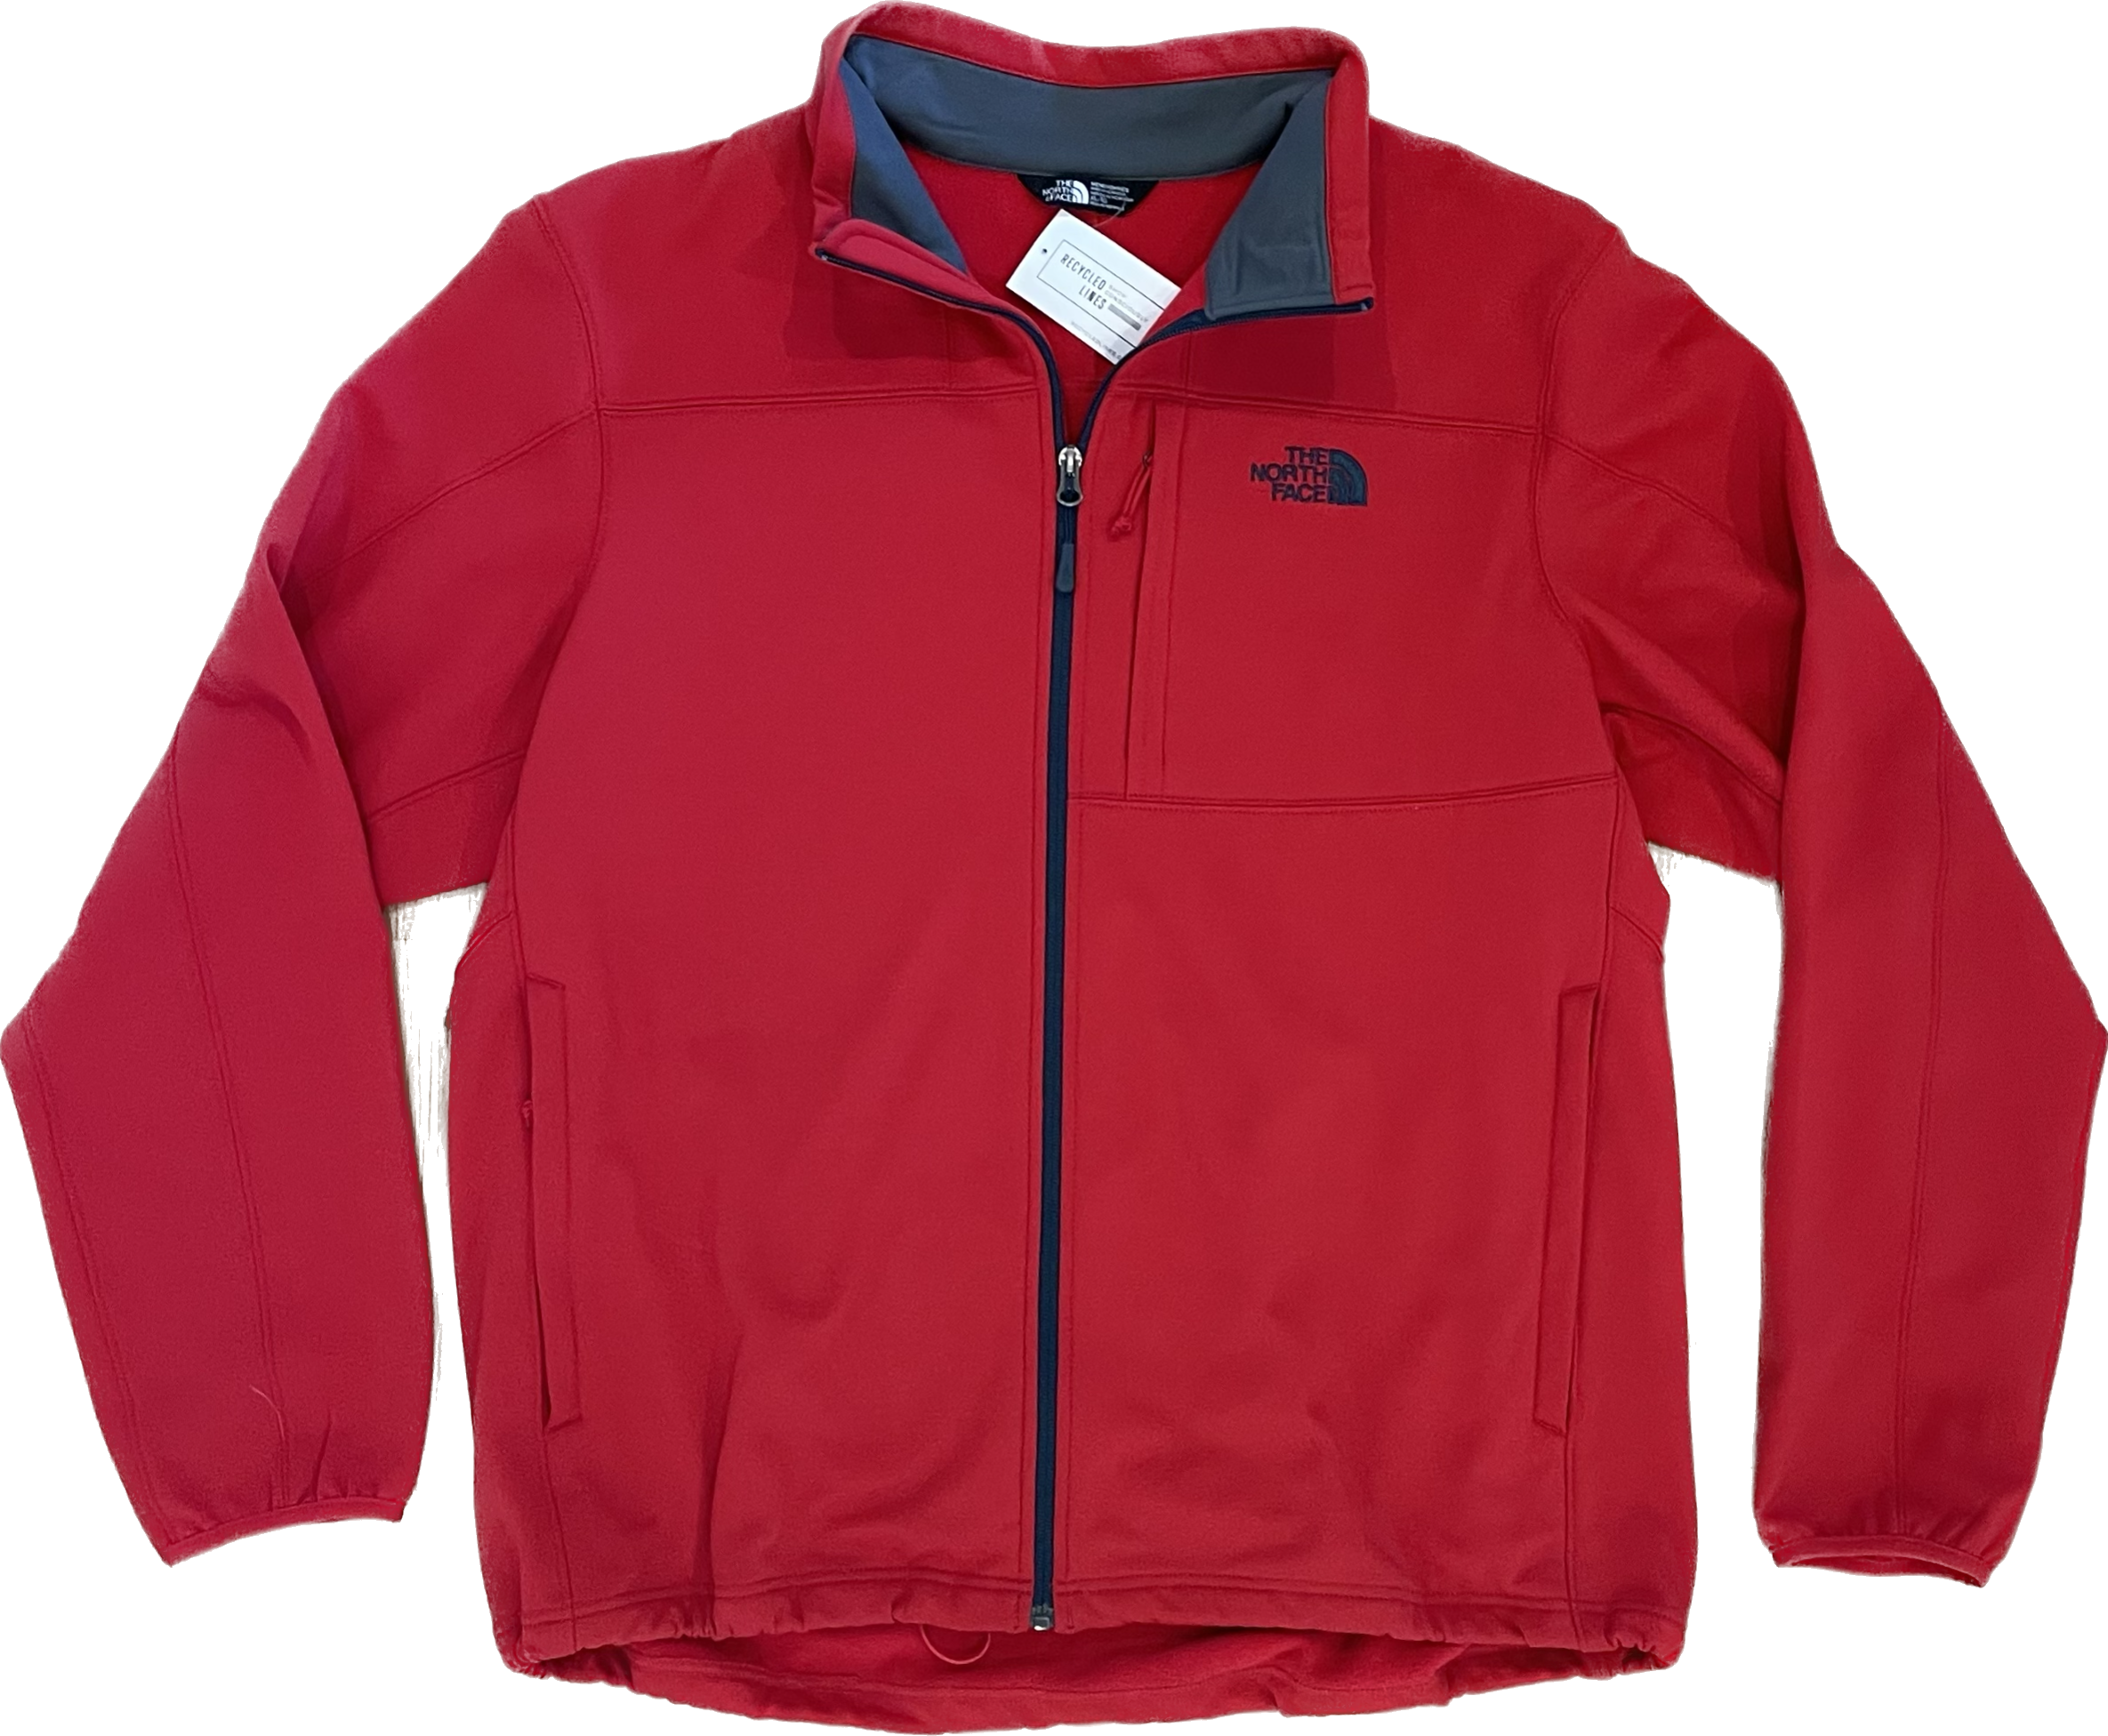 North Face Zip Up Jacket, Red Mens Size XL